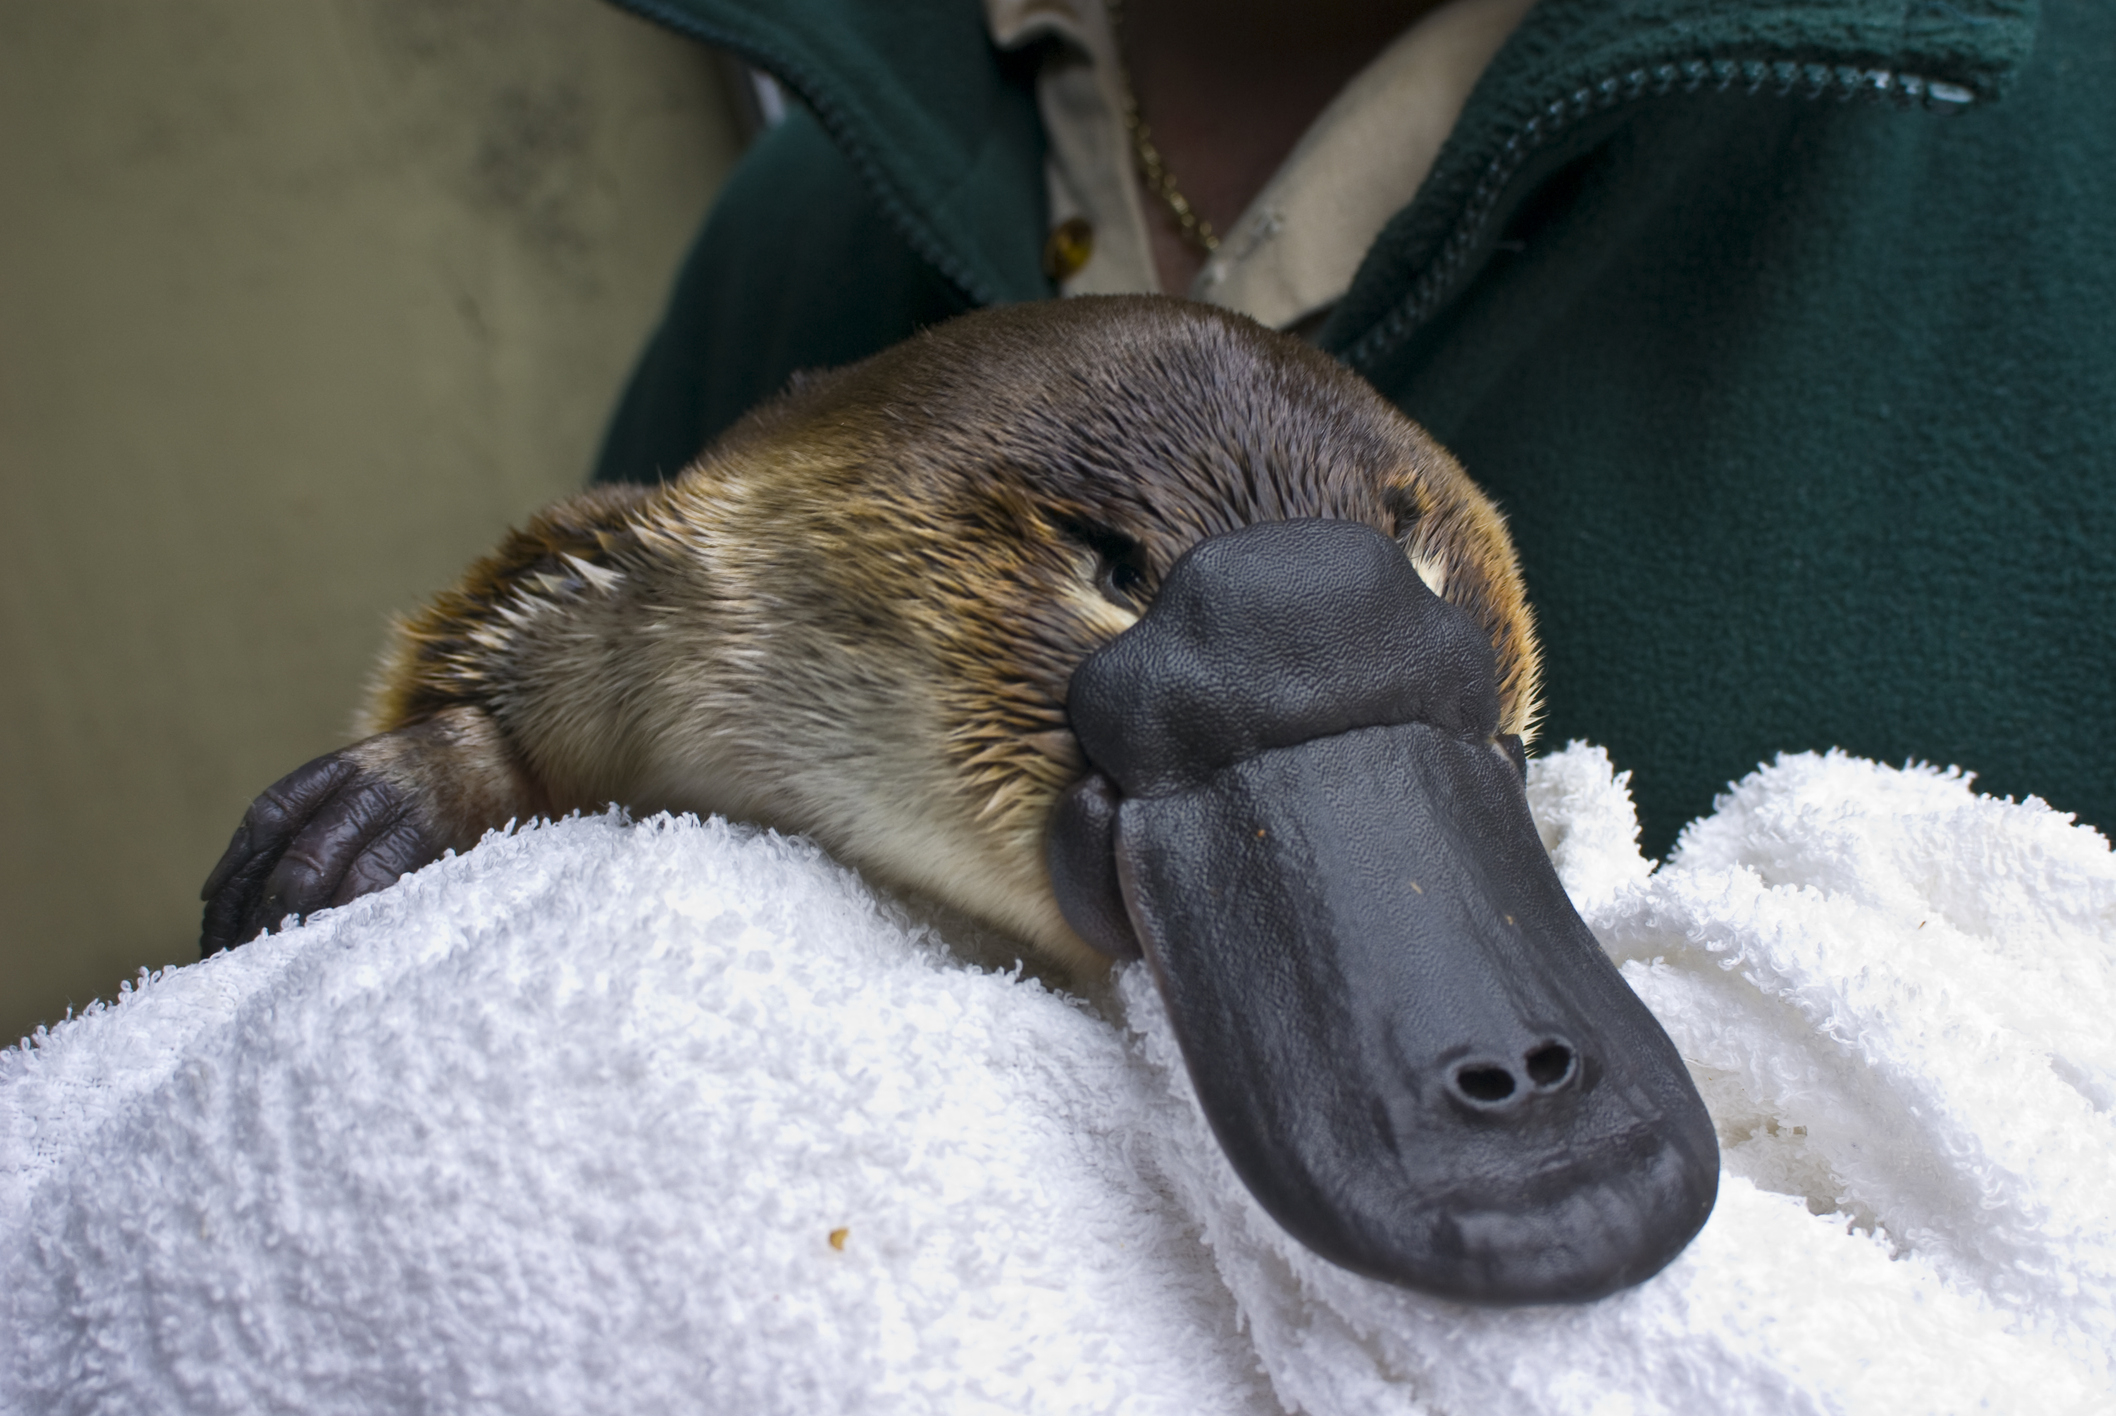 Platypus being cradled in a towel by a person wearing a green jacket